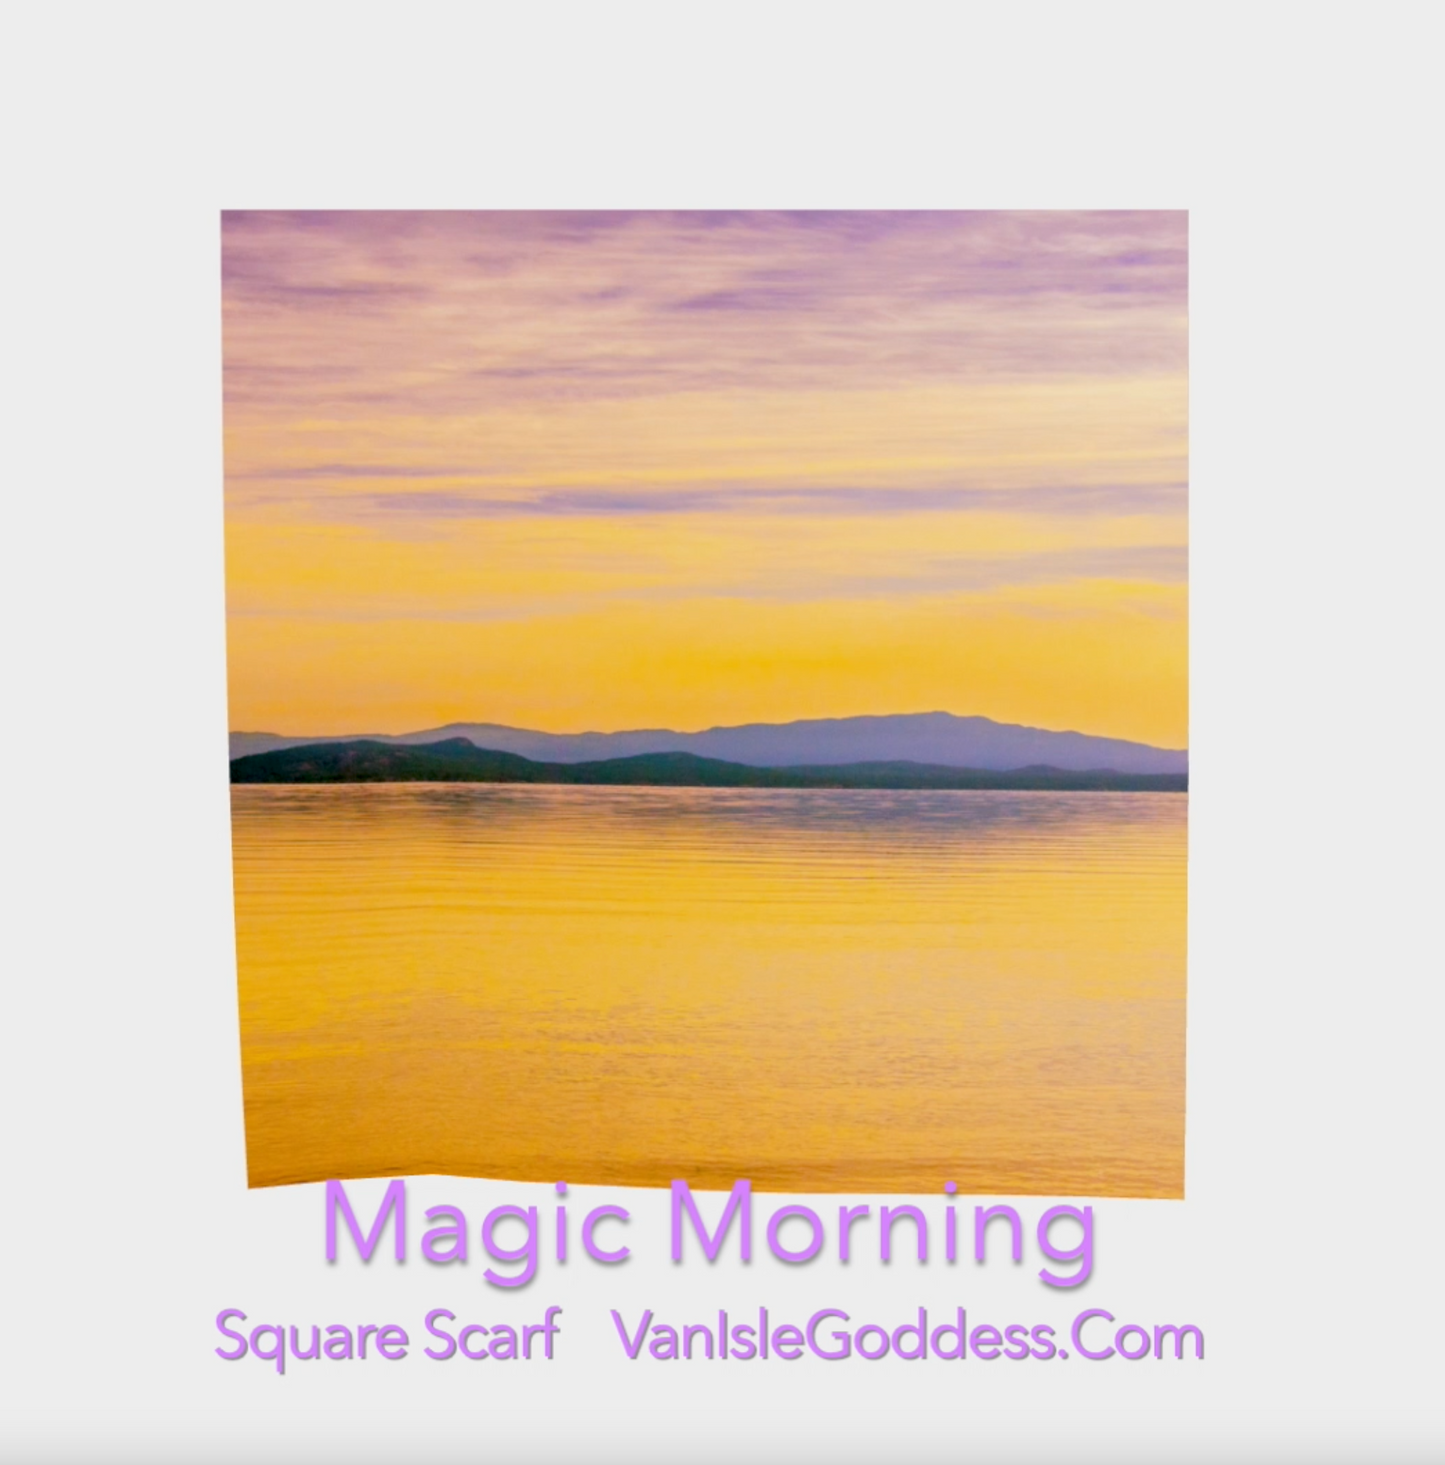 Magic Morning Parksville Beach square scarf shown full size.